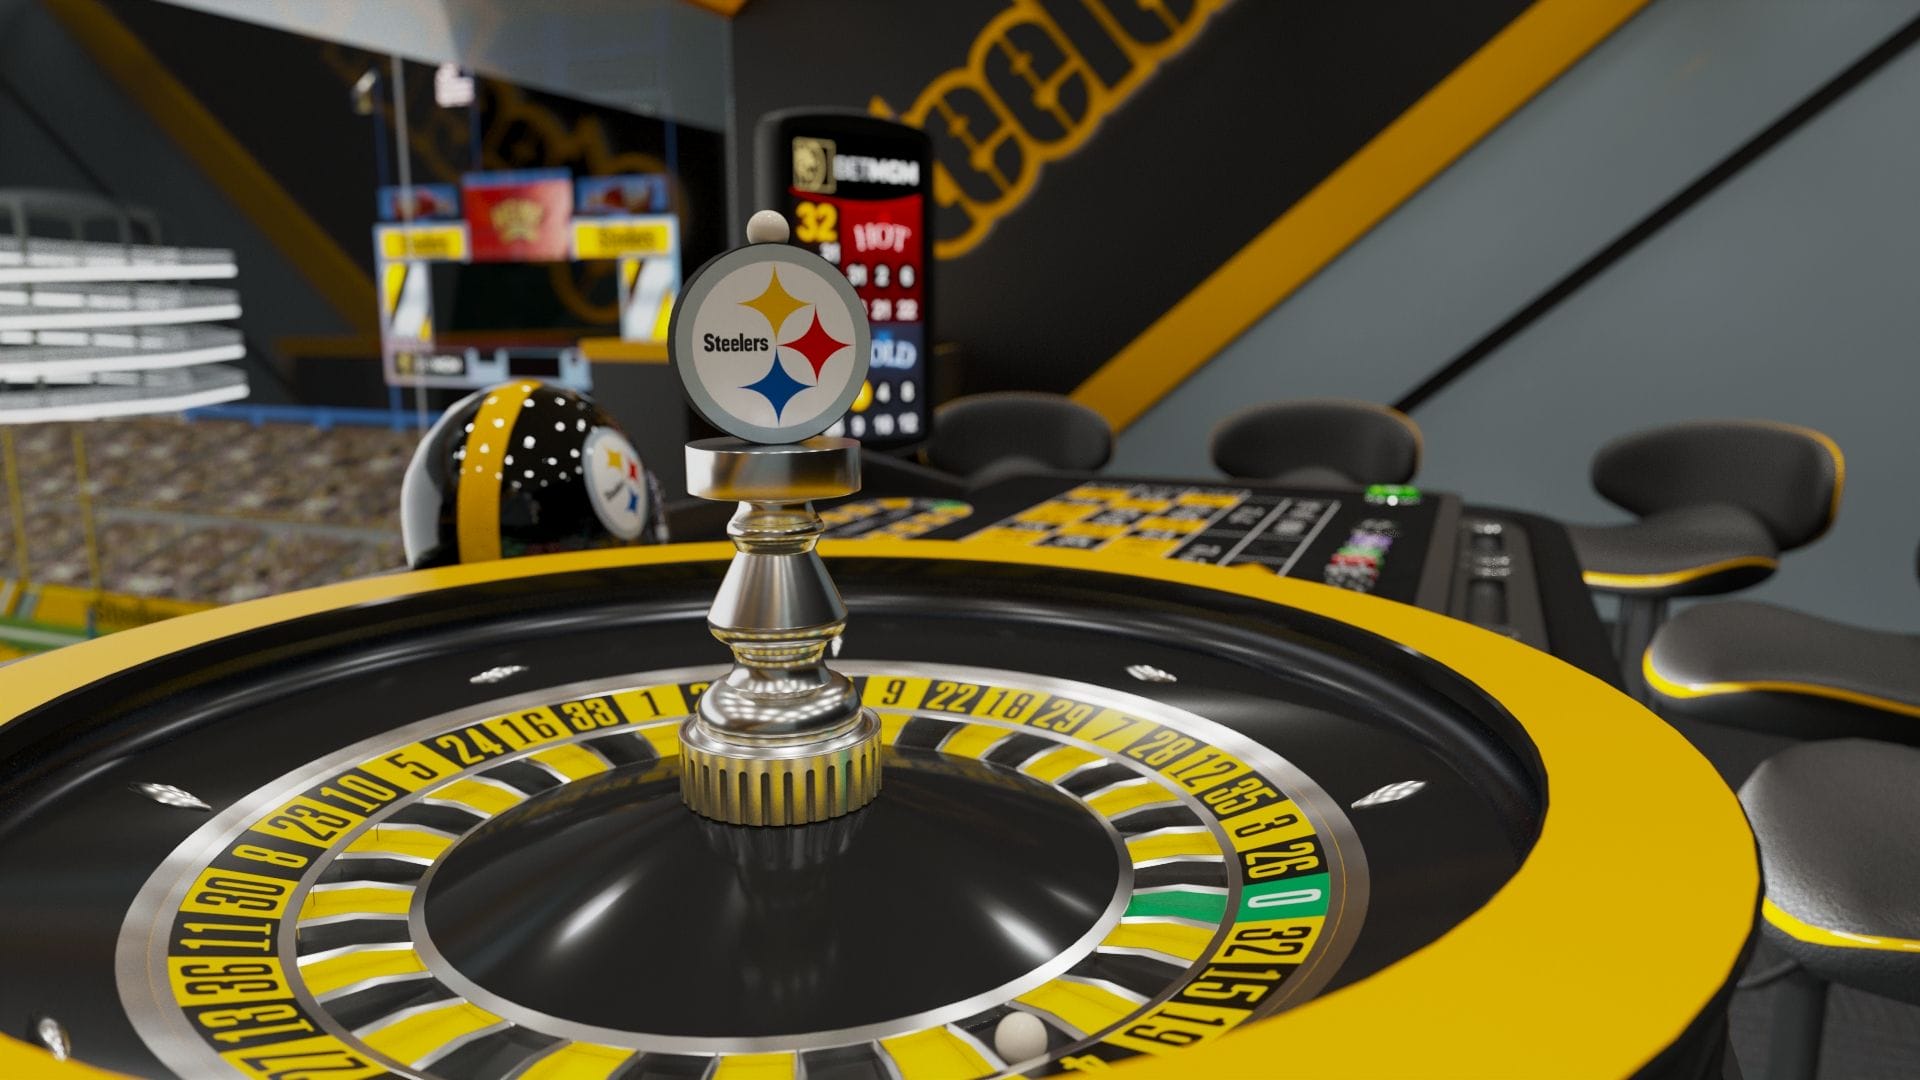 Roulette with the Pittsburgh Steelers logo.